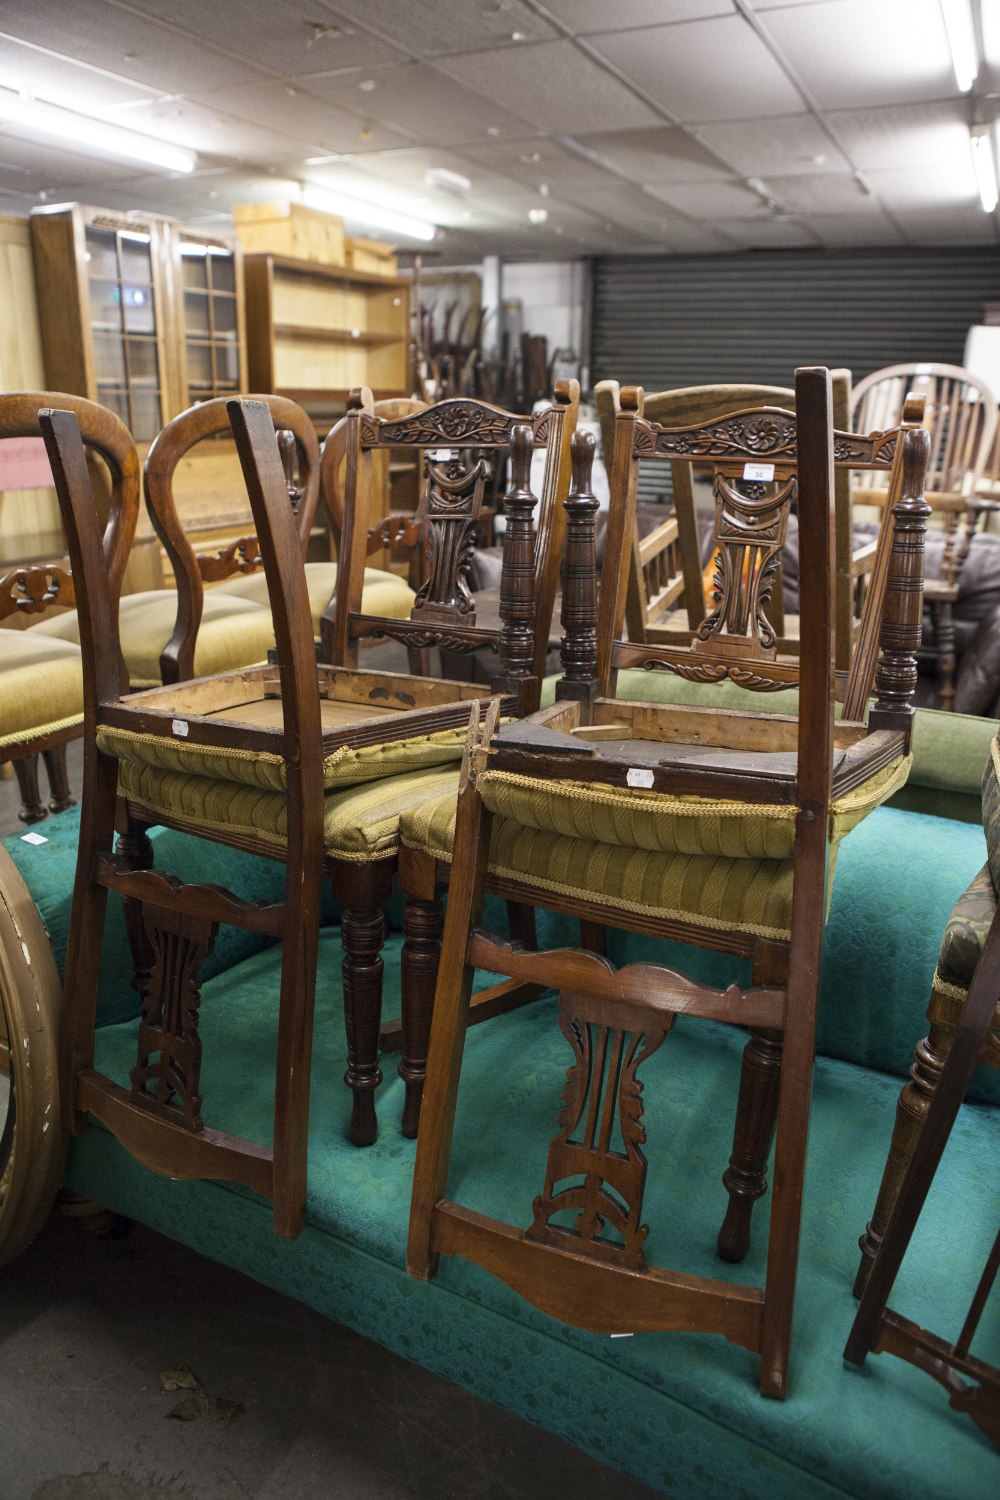 SET OF FOUR LATE VICTORIAN CARVED WALNUTWOOD DINING CHAIRS WITH PIERCED SPLAT BACKS AND STUFF OVER